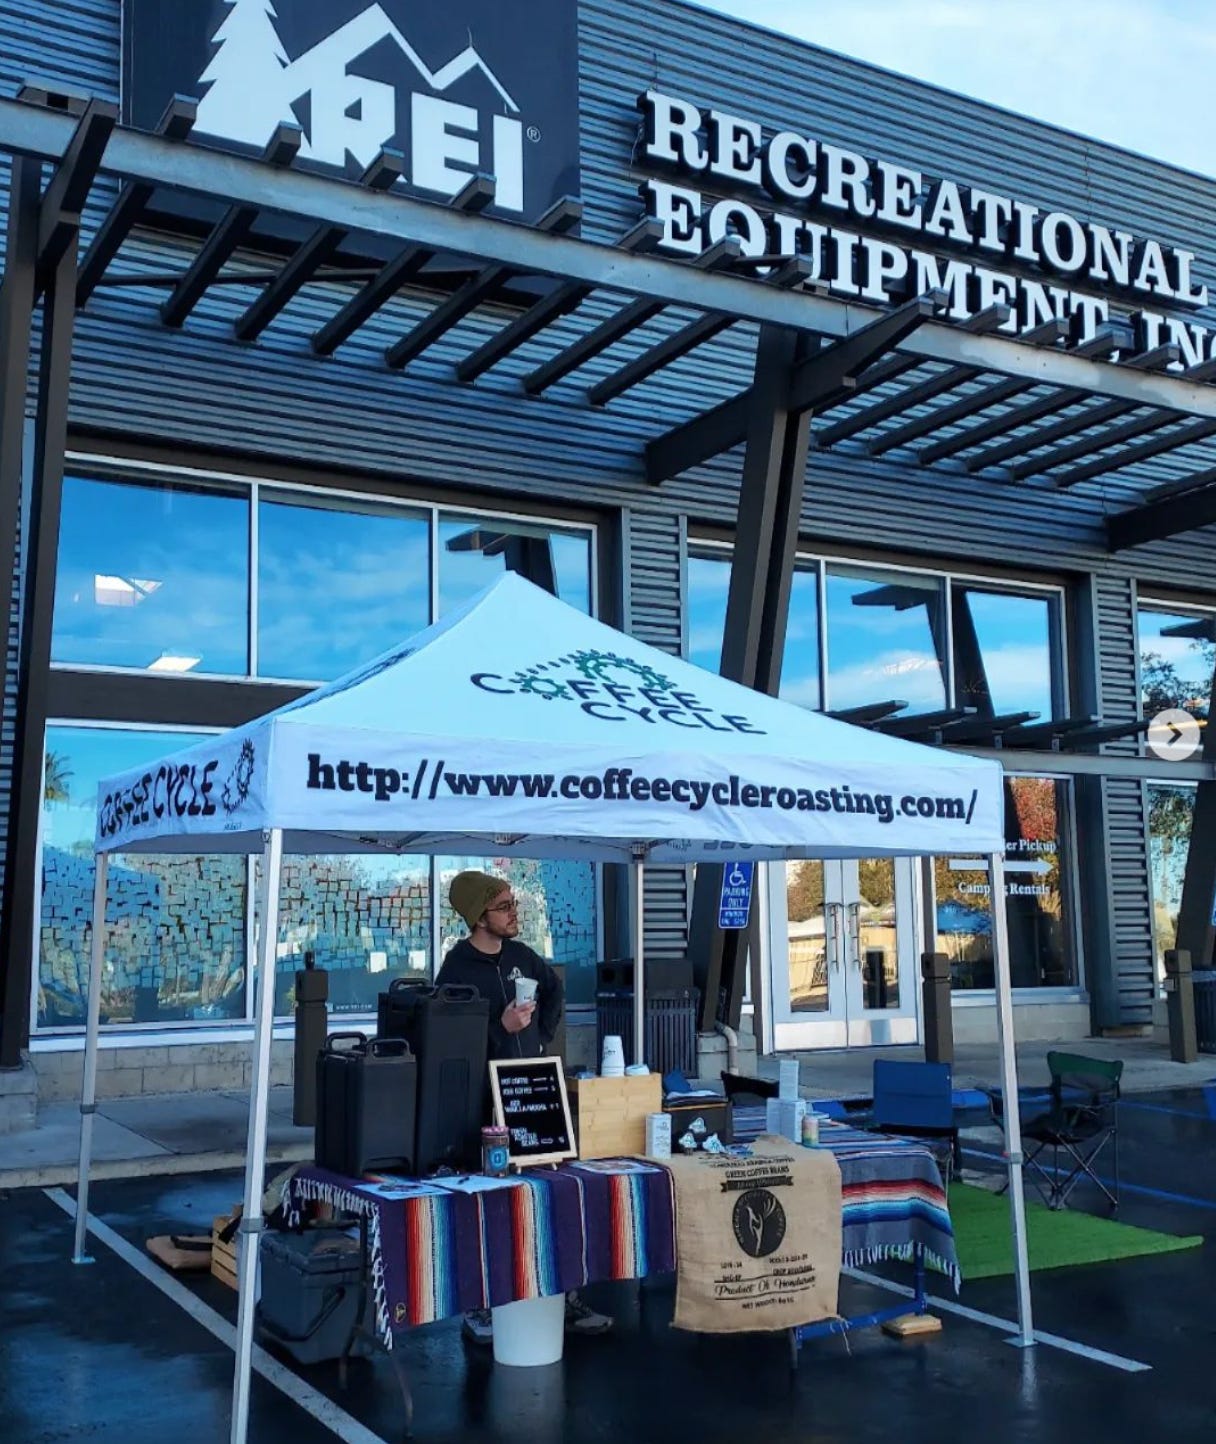 A barista in a hoodie and stocking cap stands behind a folding table covered in coffee dispensers and coffee cups under a pop-up tent in front of an REI store in the early morning.